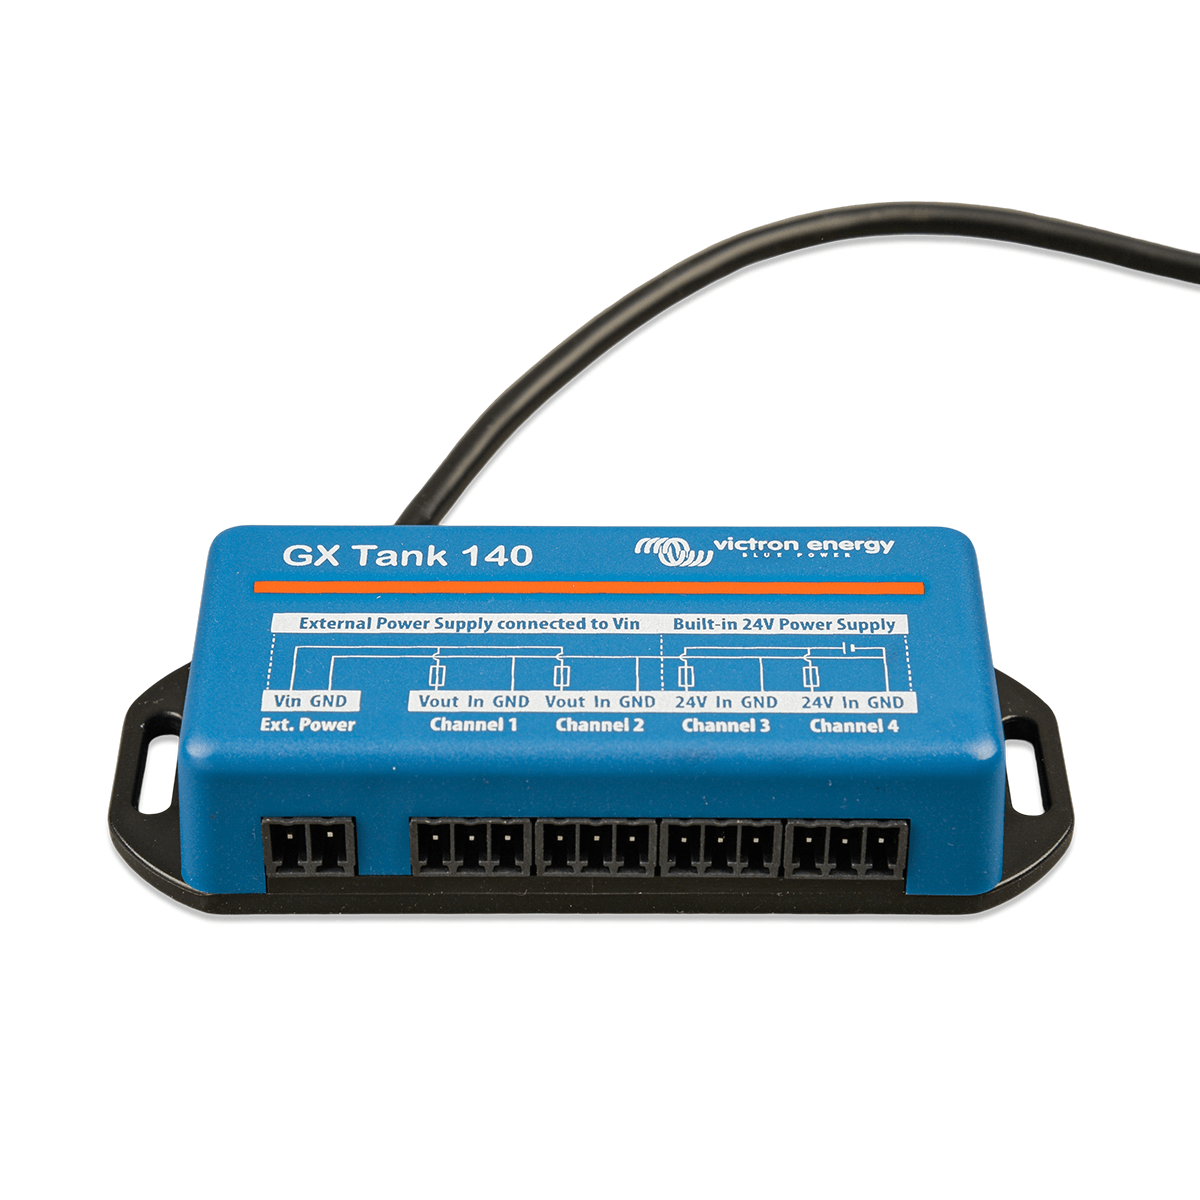 The Victron GX Tank 140 - Voltage Sensor for Tank Level Monitoring from Blue Victron Energy features multiple connectors and is set against a pristine white background.